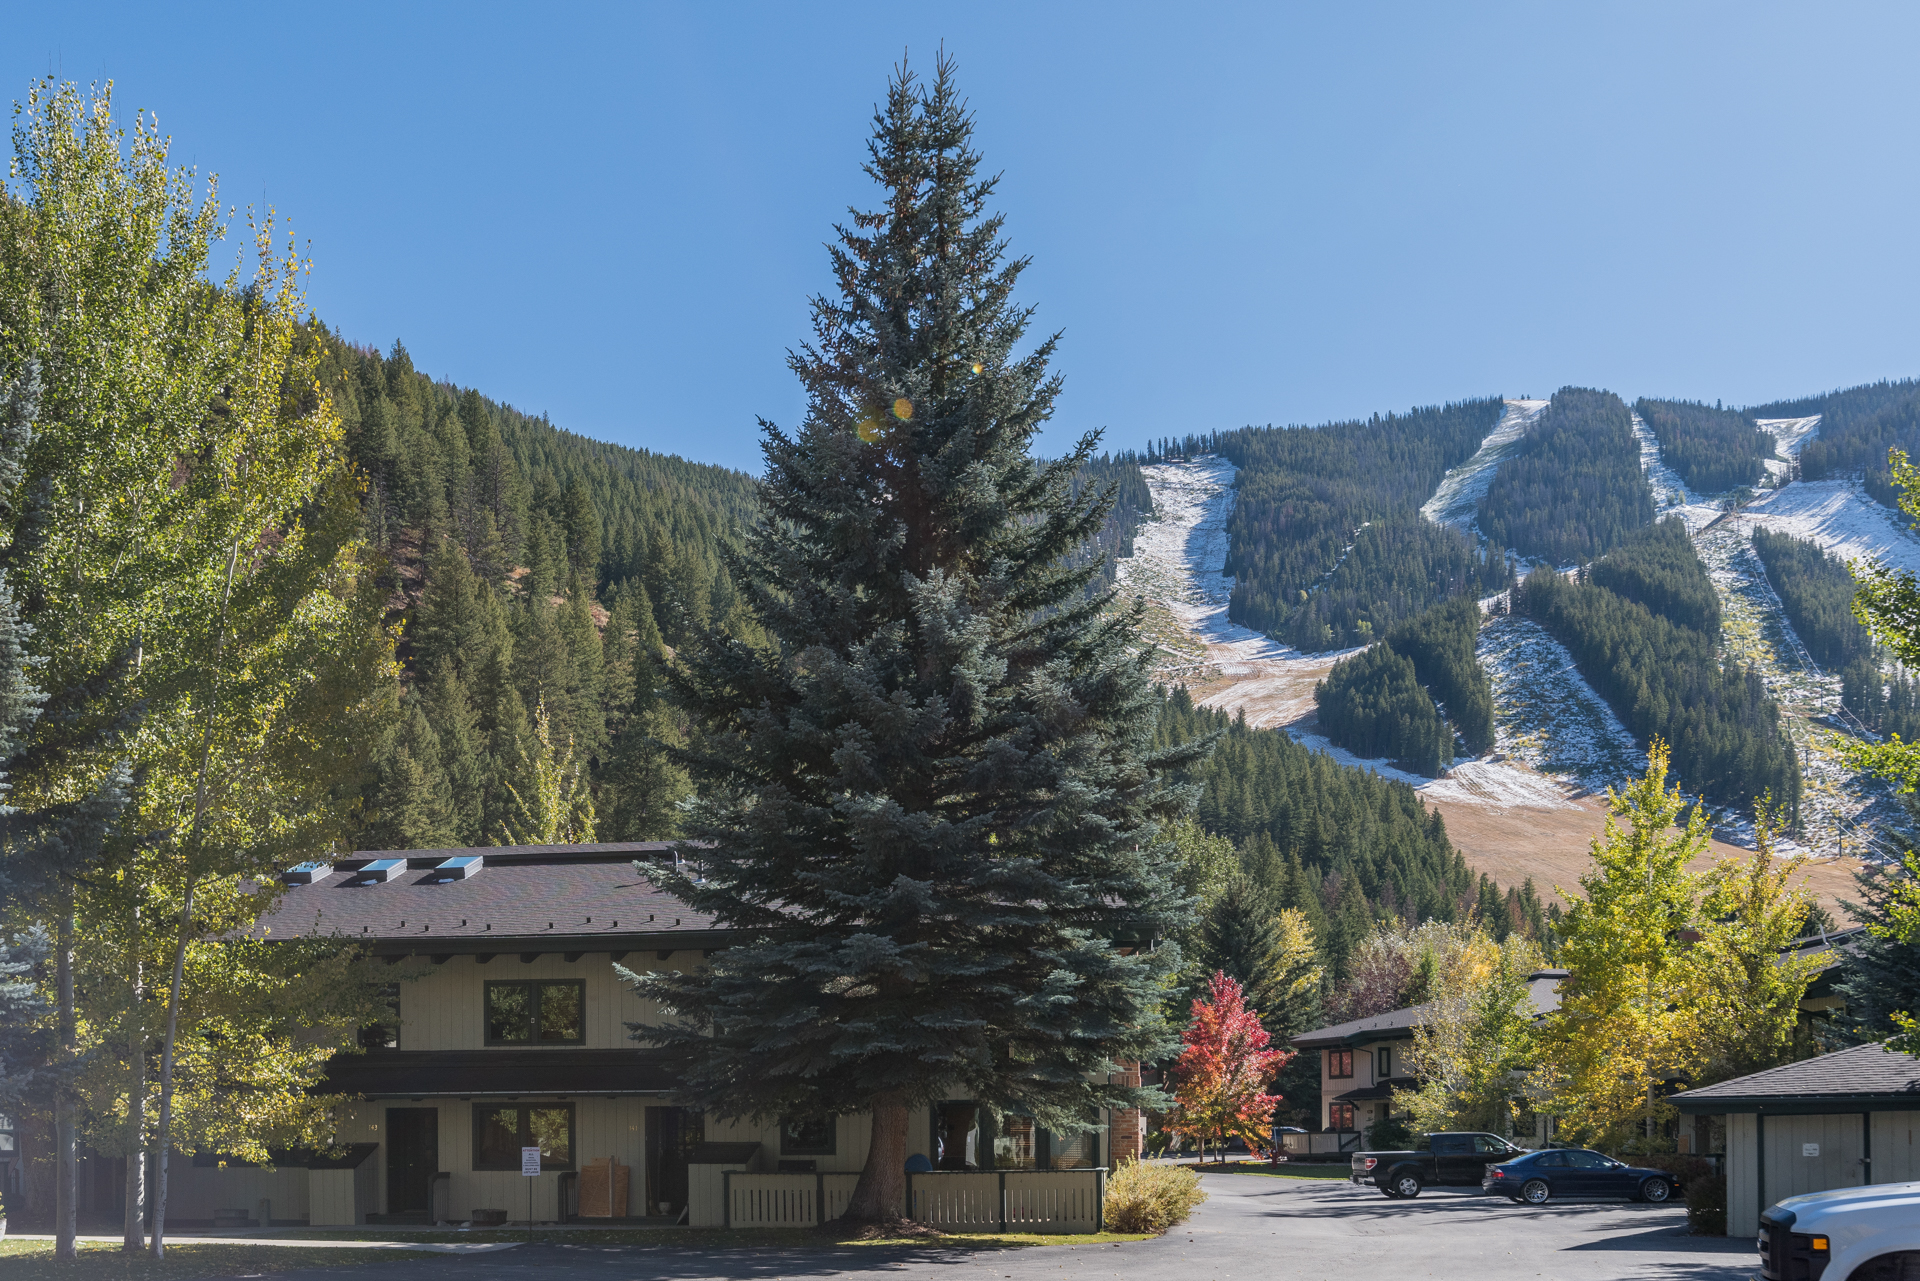 The Featured Listing in Ketchum is located at 315 SkiWay Drive at the Prospector Condos 